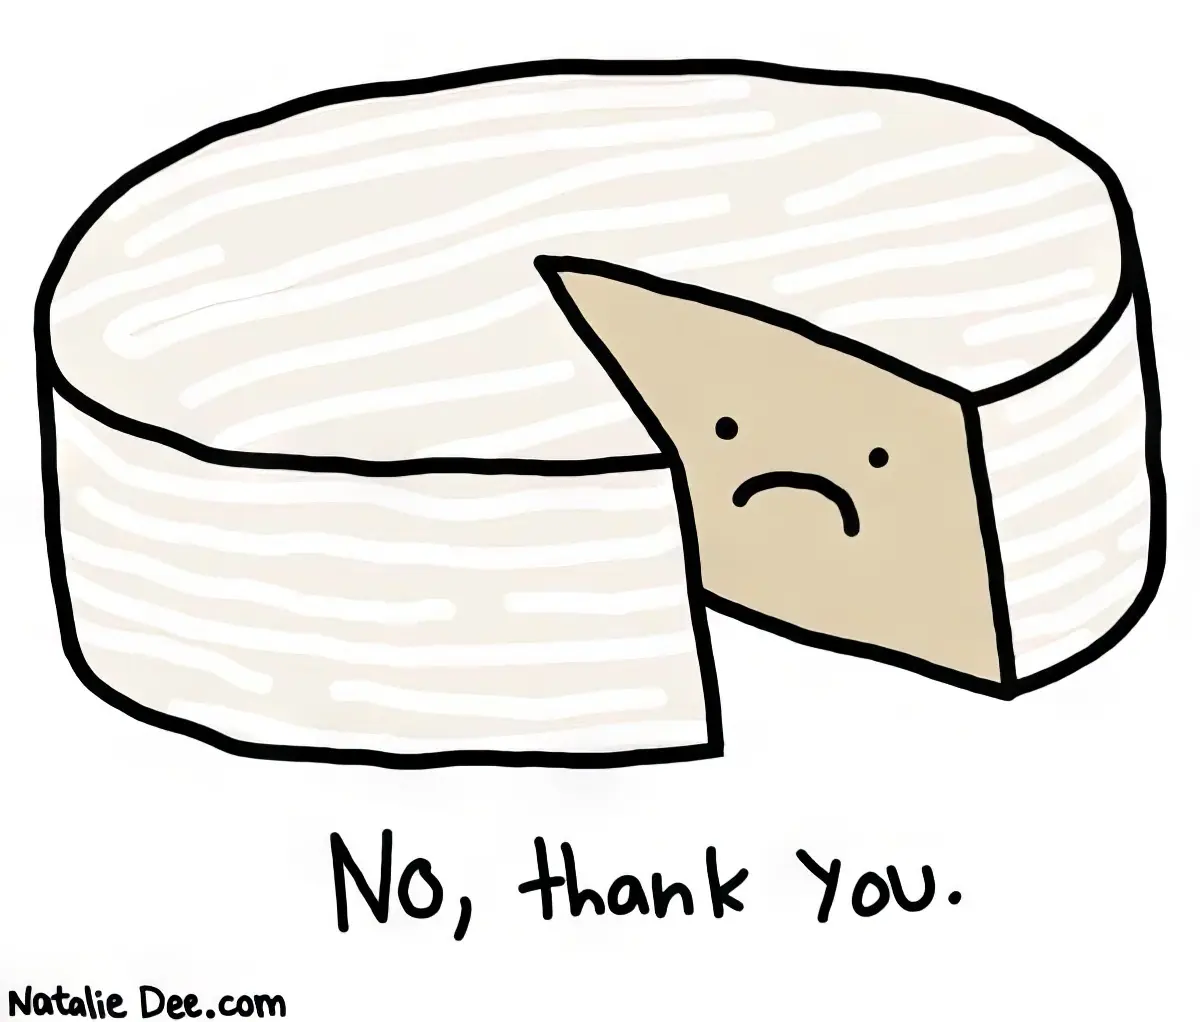 1592-dont-want-no-brie-thanks-anyway.